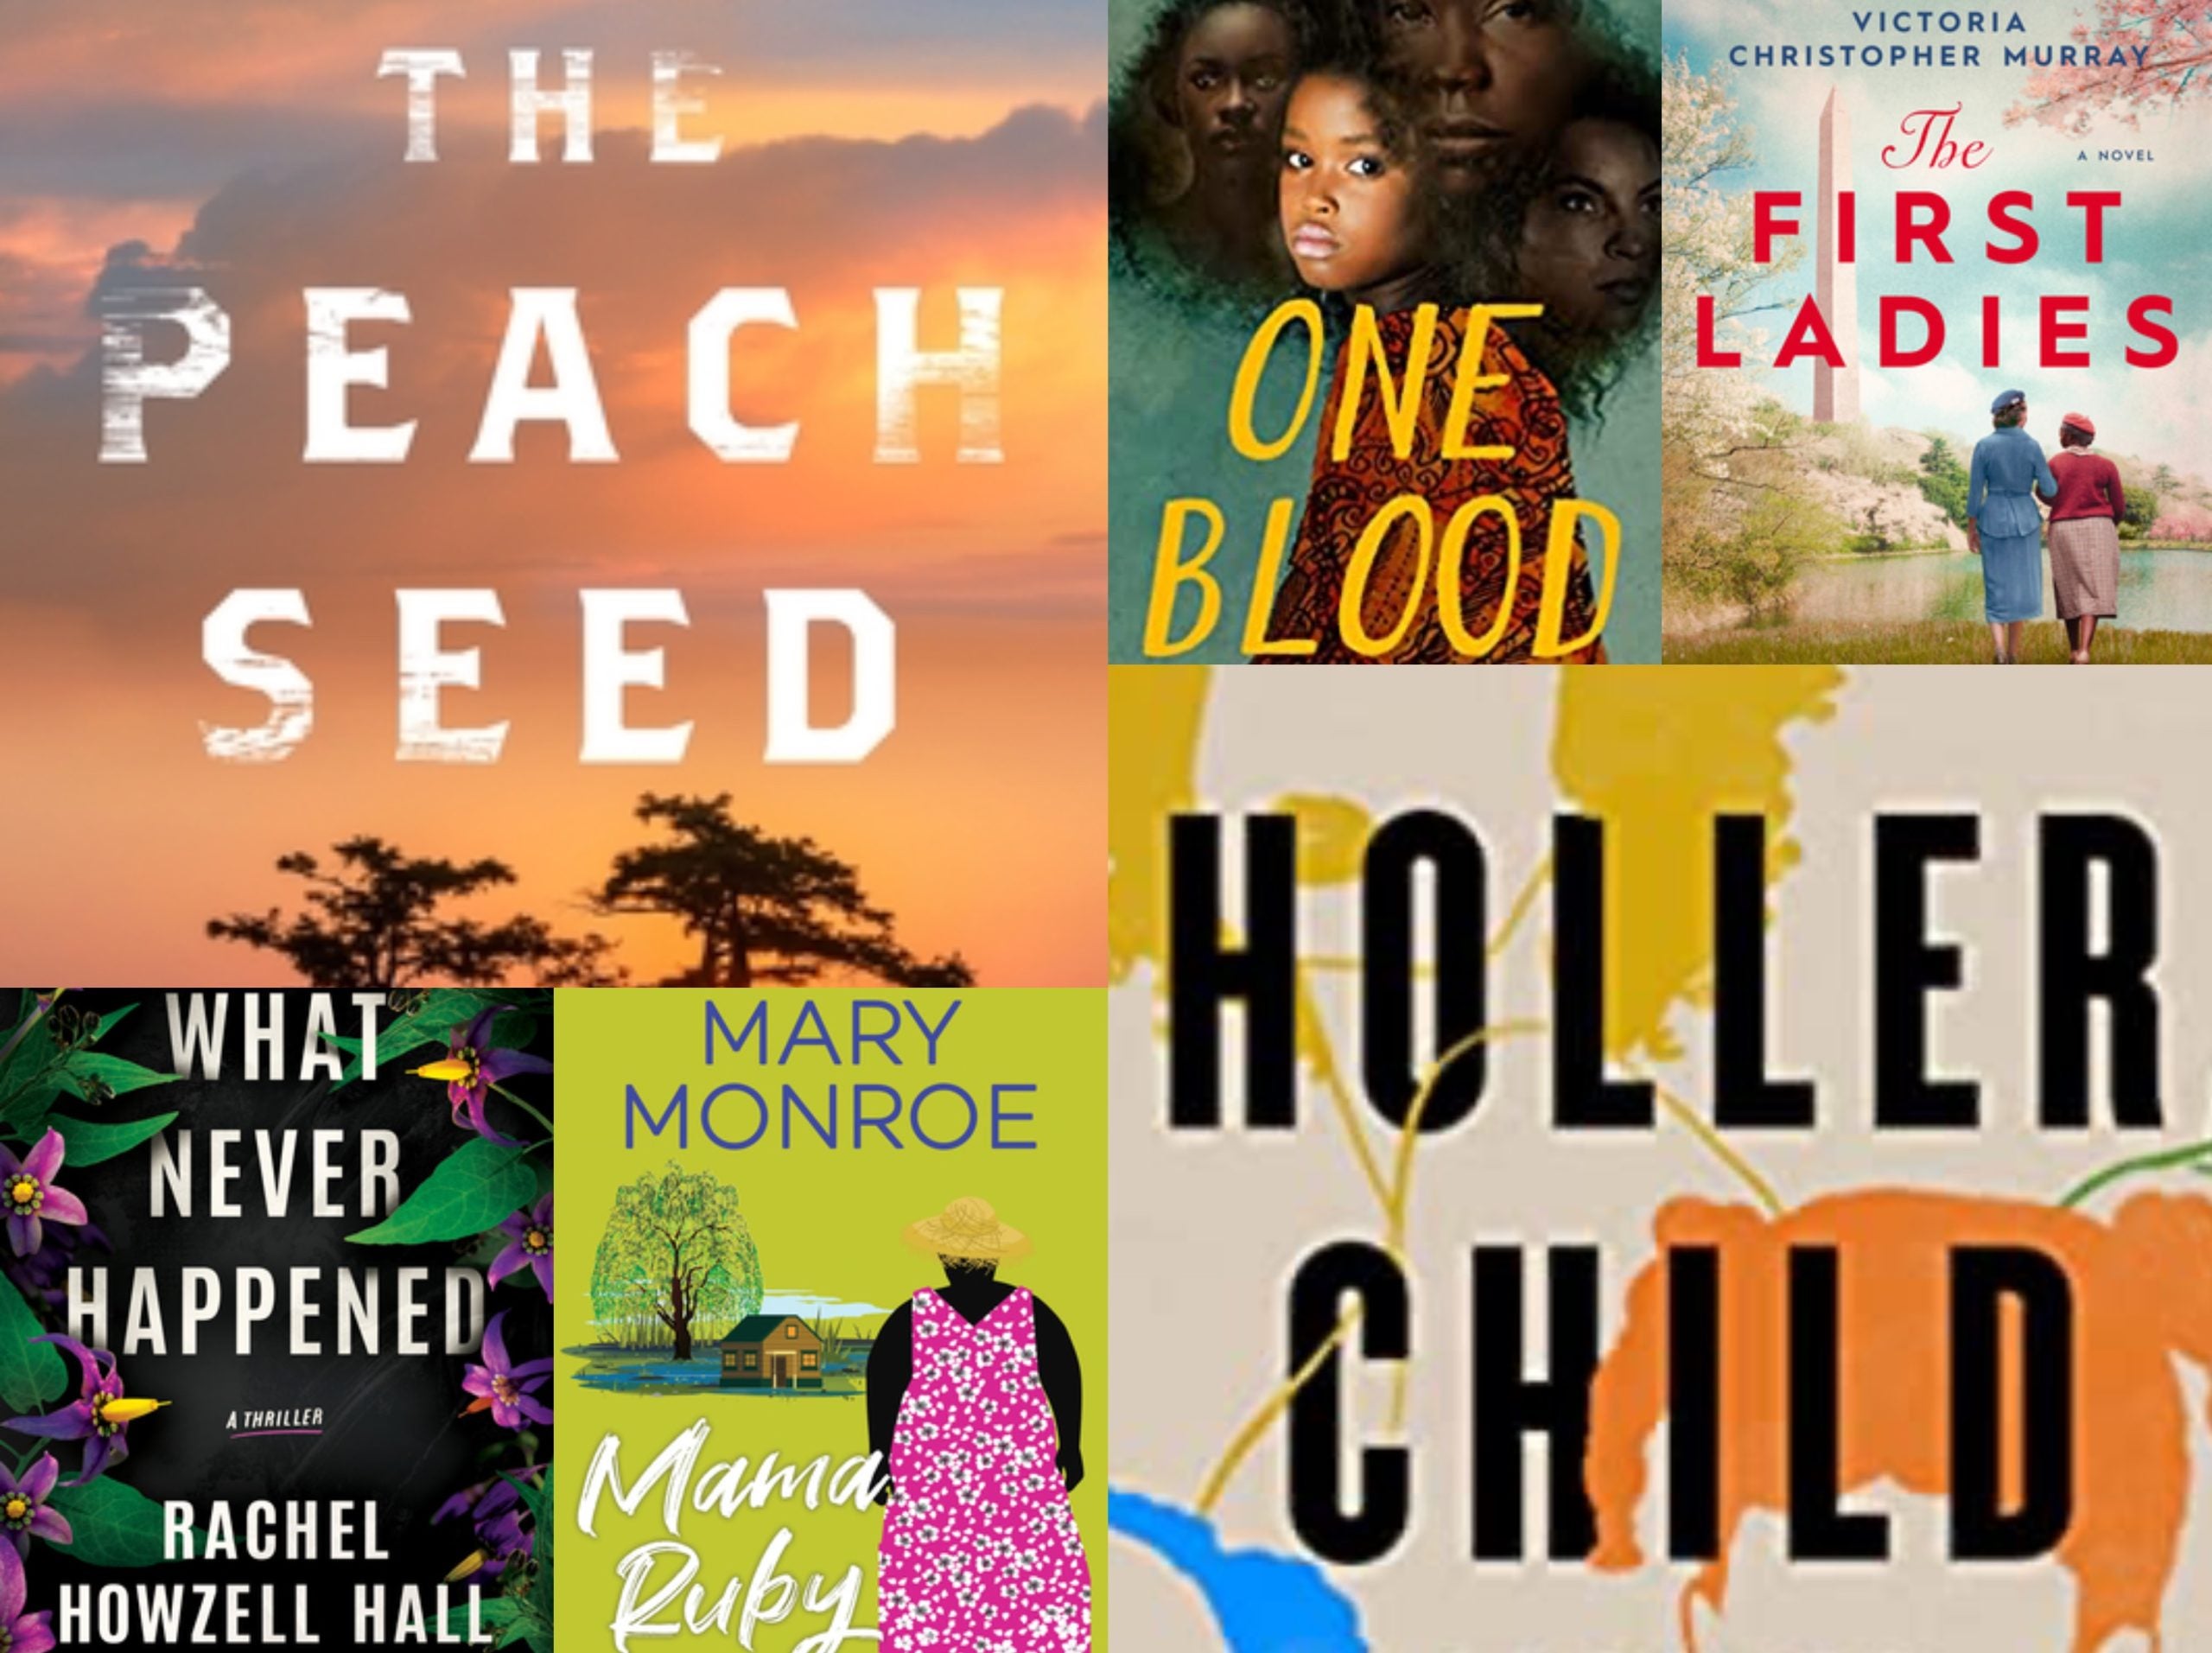 The Best Books We Read in 2023 - Independent Book Review